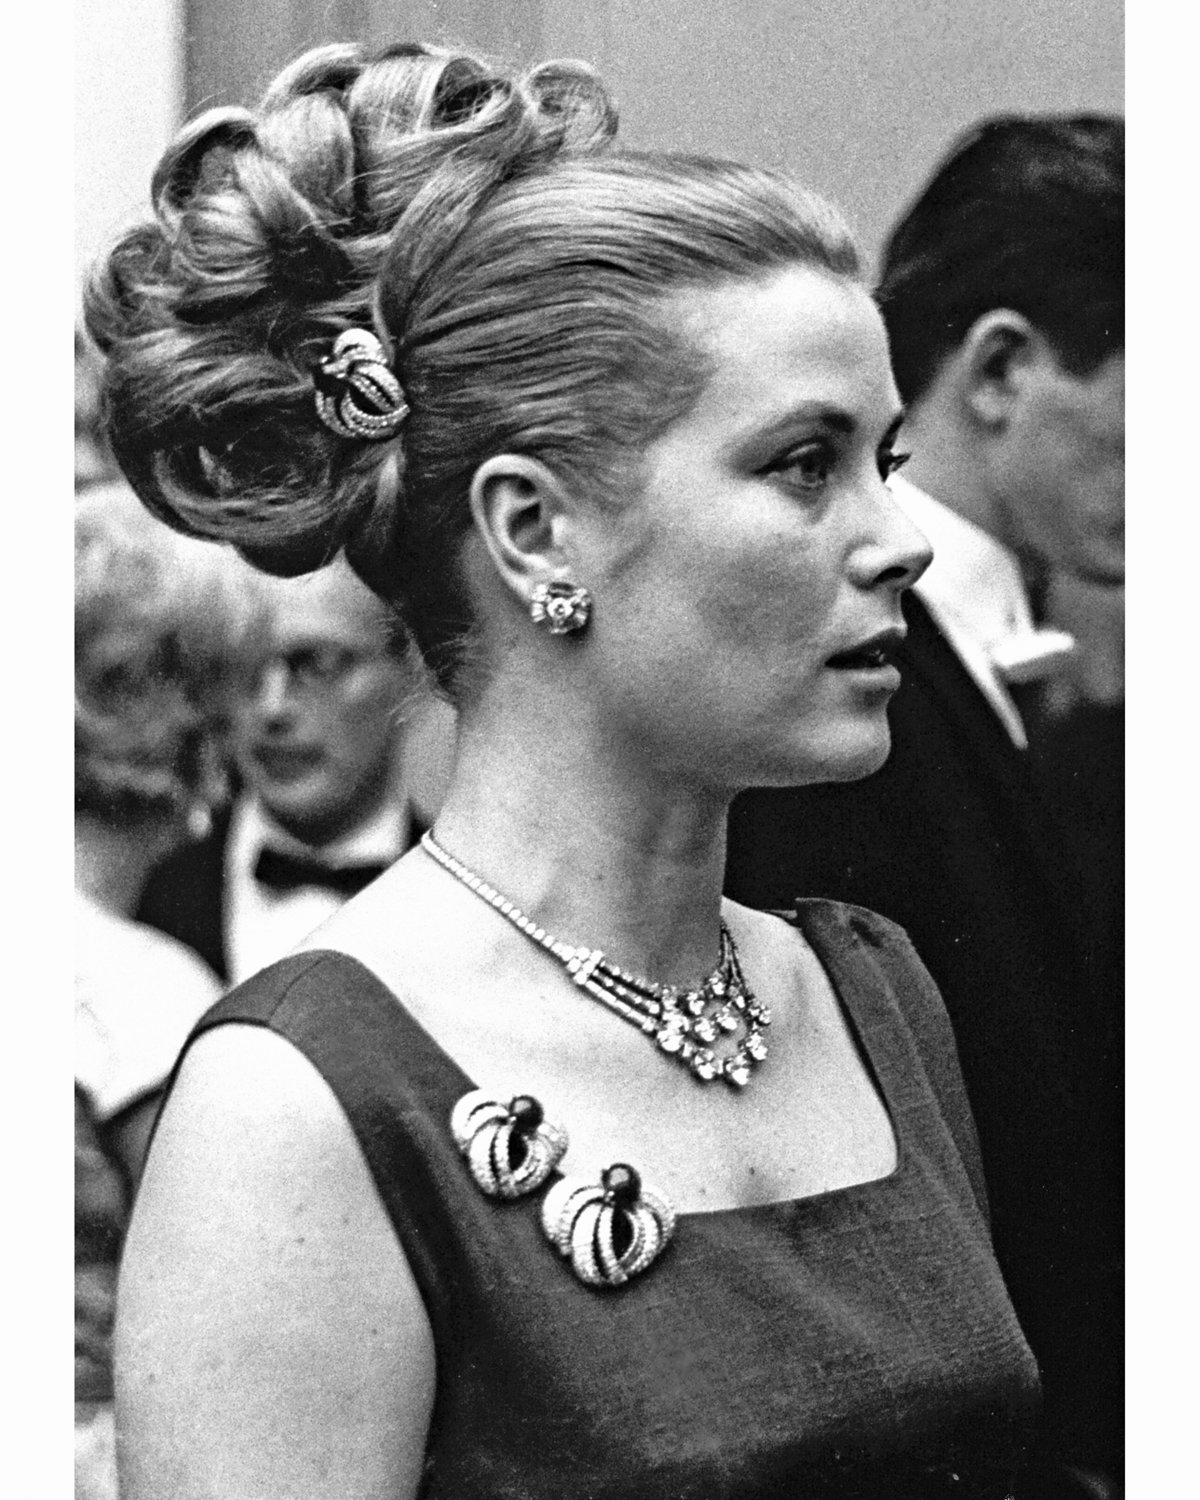 Jack Rosen photographed film star Grace Kelly at a formal event. A Philadelphia native, she once acted at the Bucks County Playhouse.